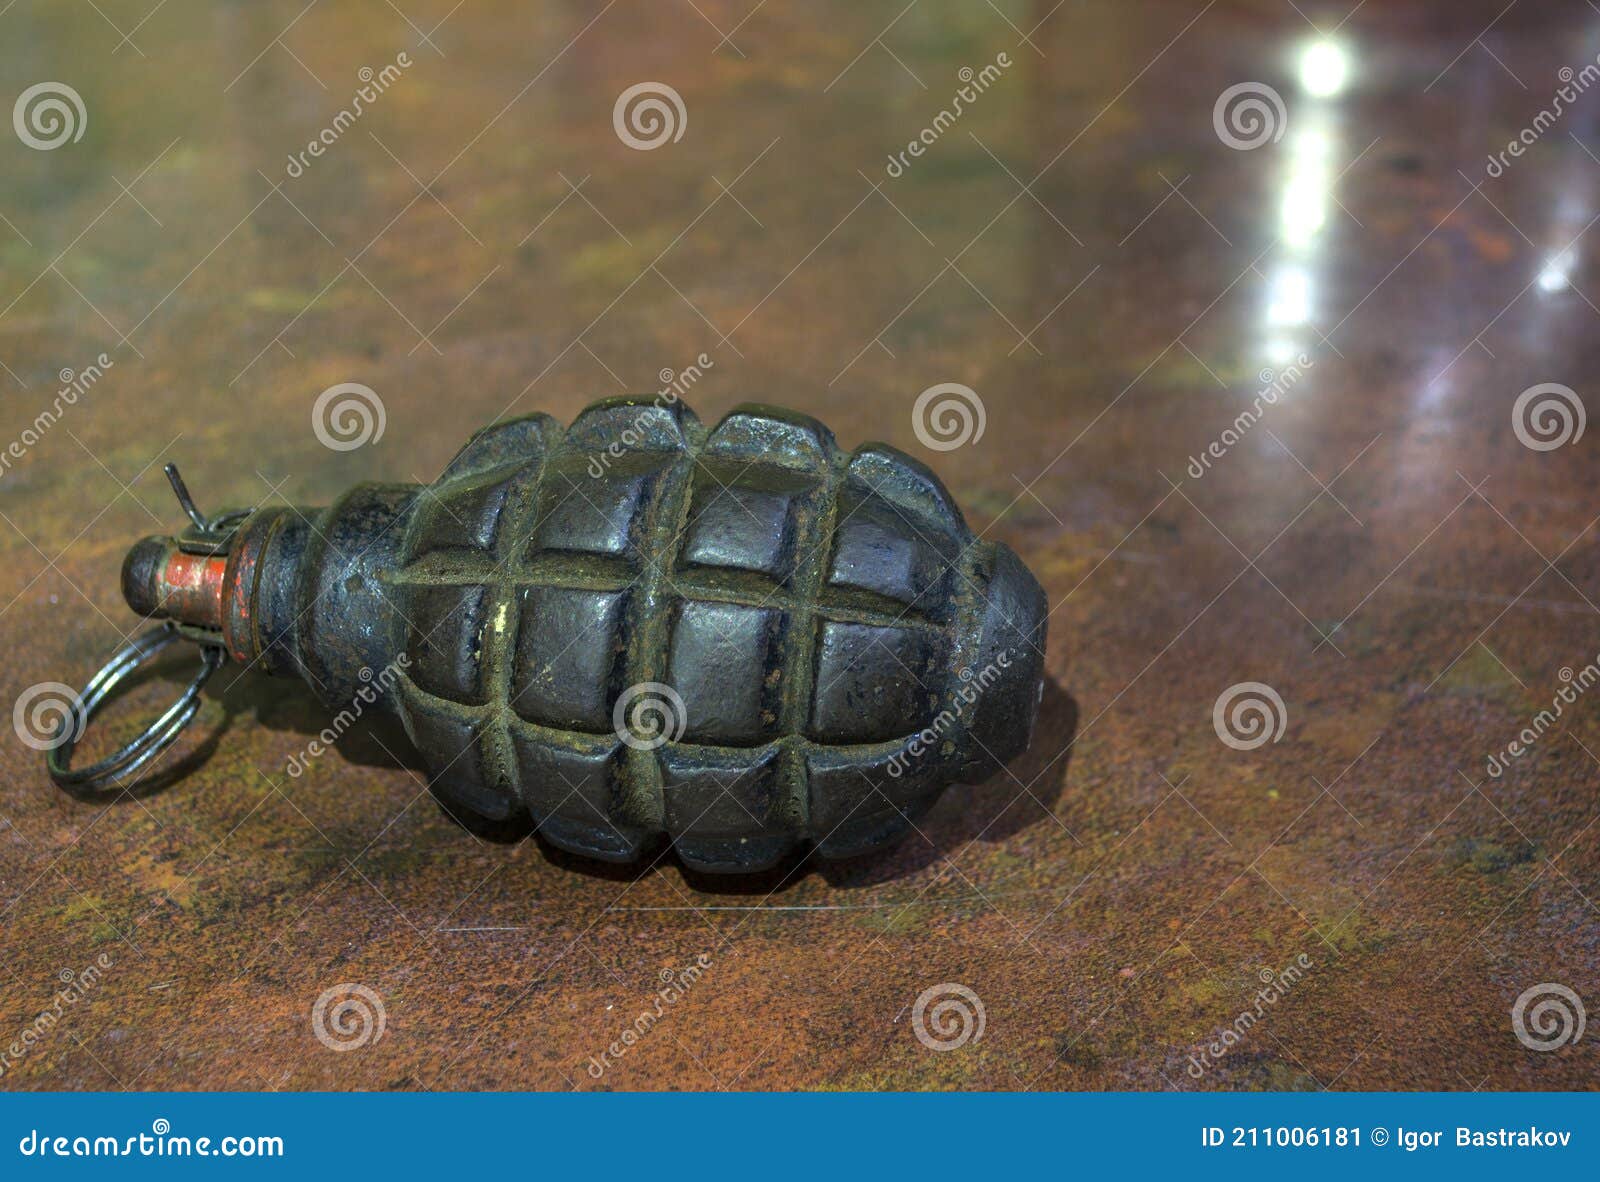 fragmentation grenade with hole, on camouflage clothing